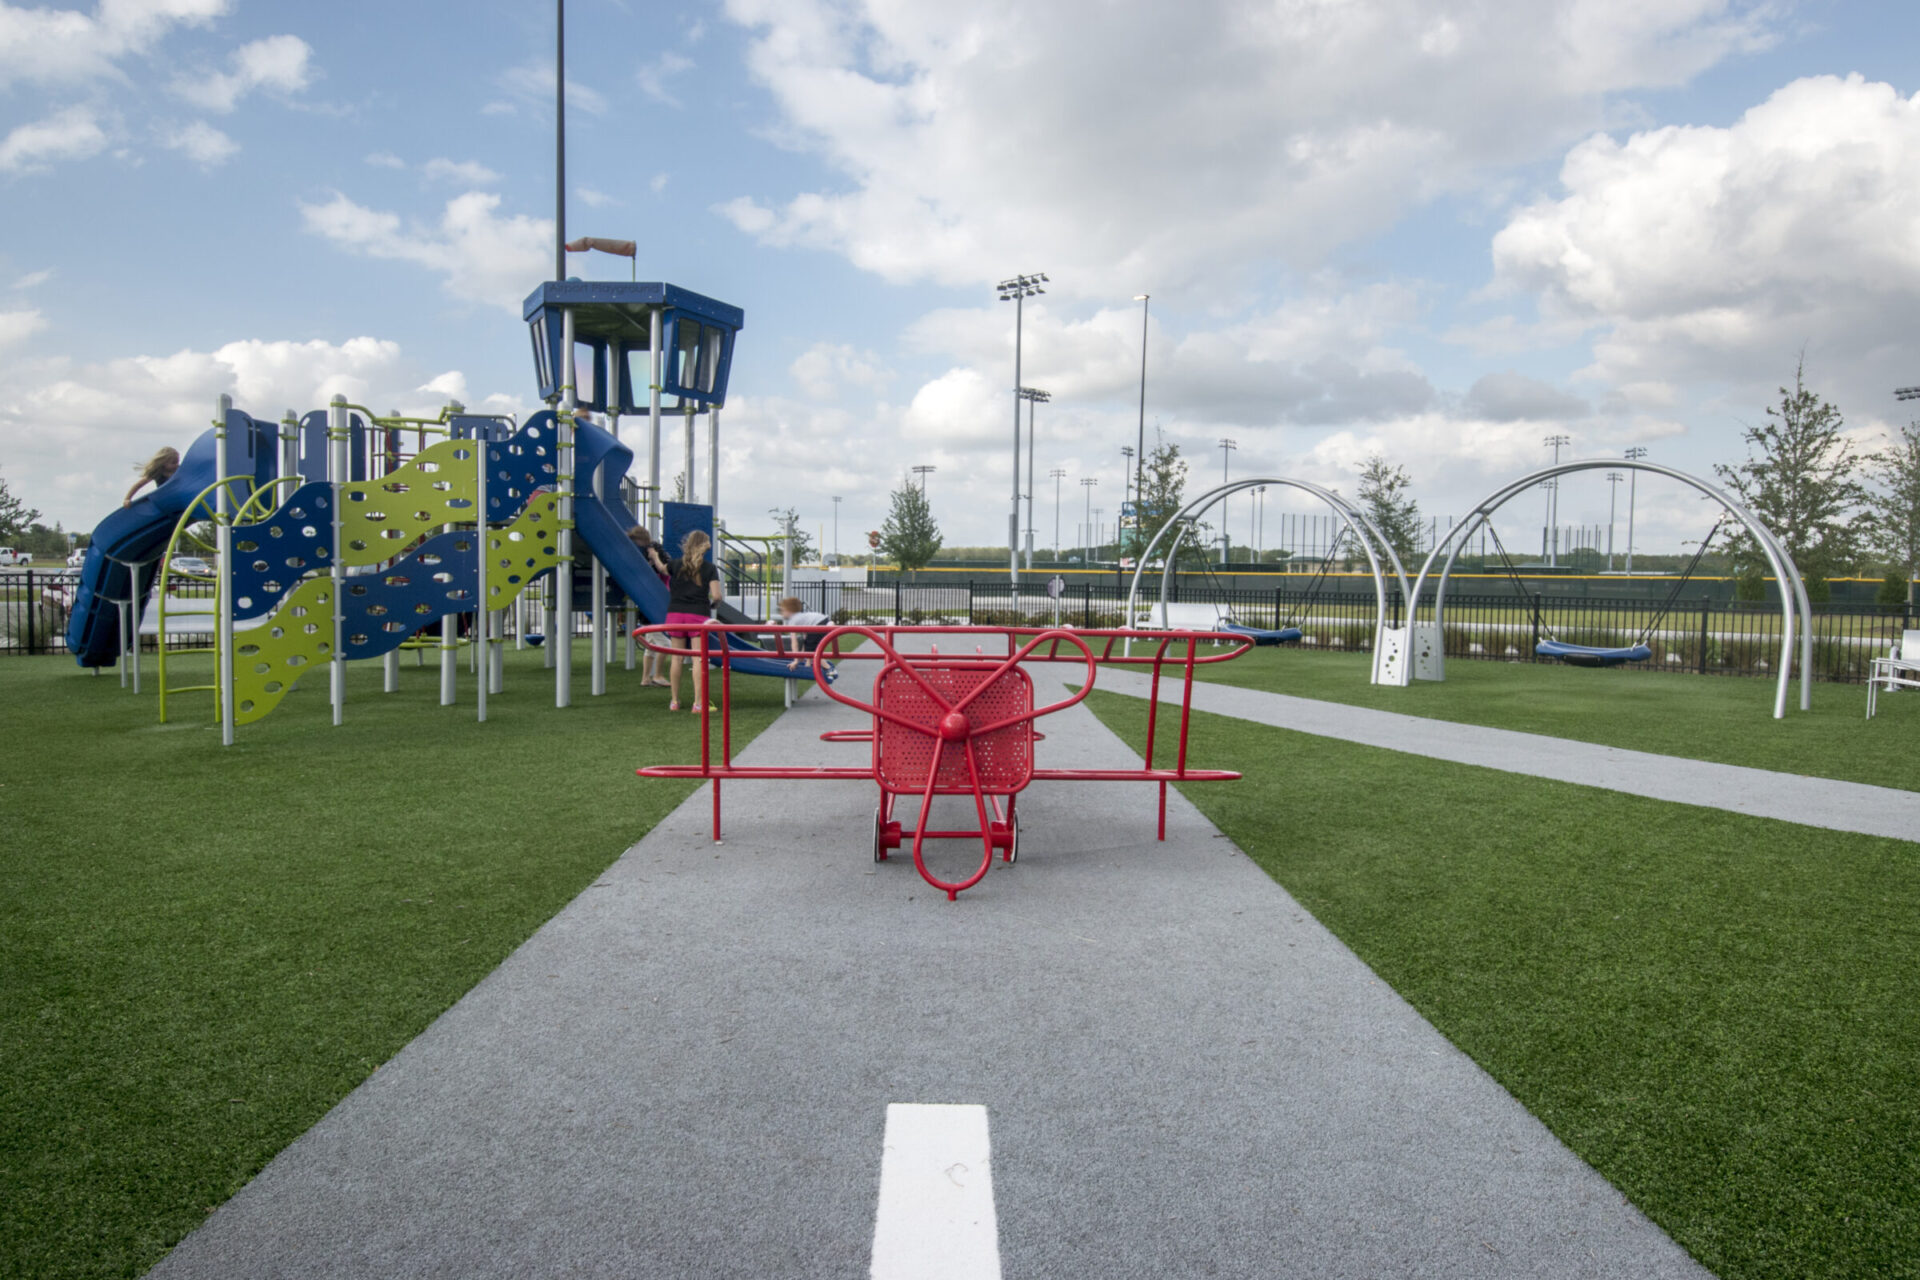 An outdoor playground featuring a red table, climbing structures, artificial turf, and people engaging in various activities under a partly cloudy sky.